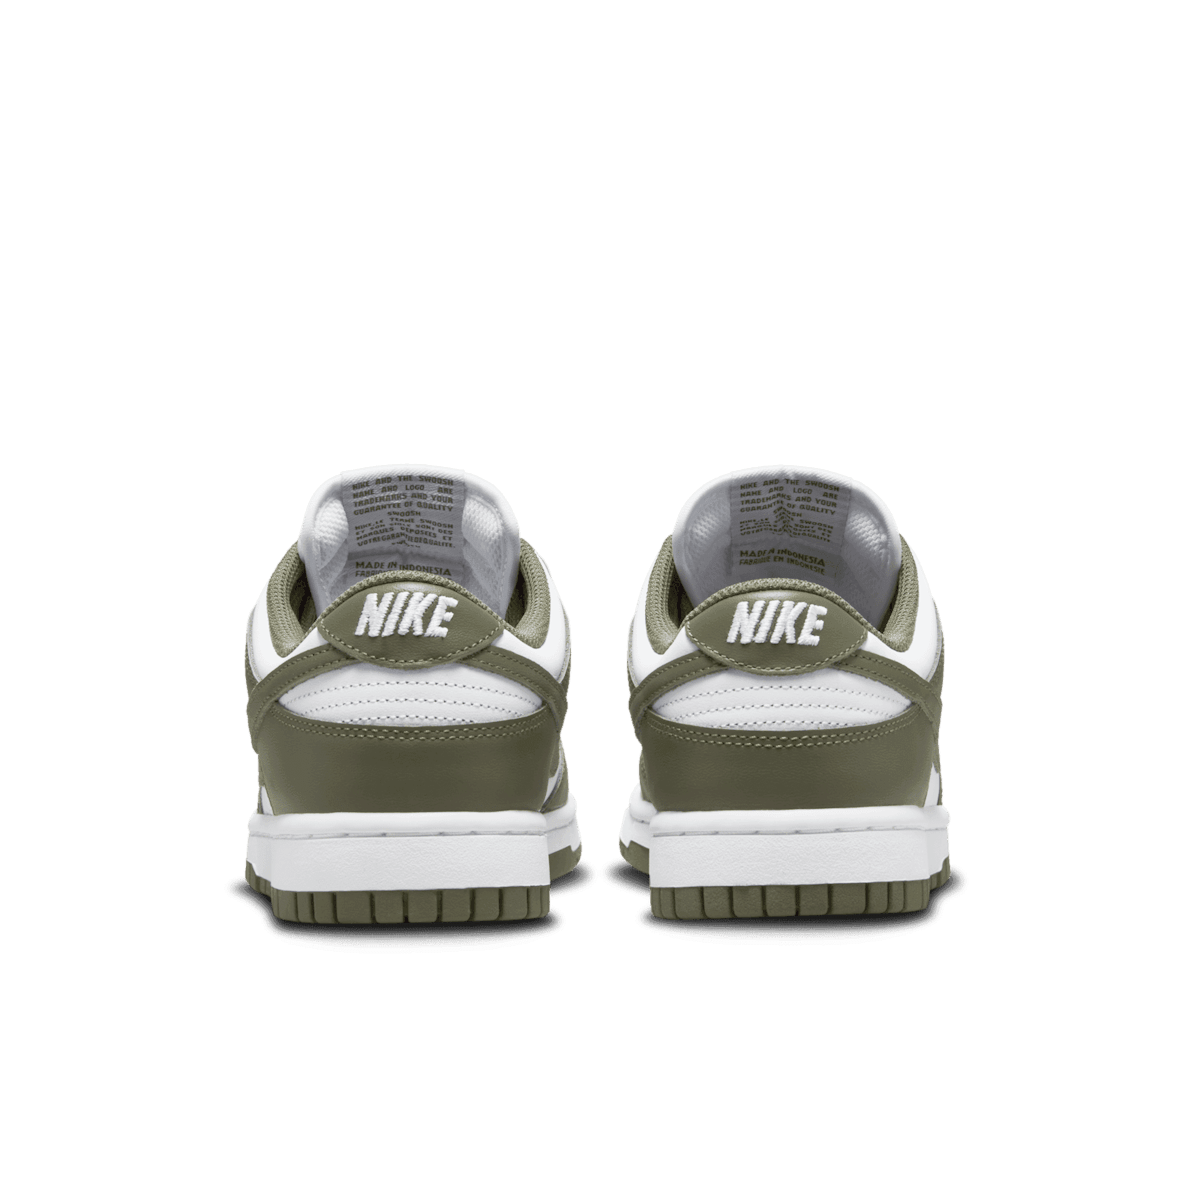 The Nike Dunk Low “Medium Olive” is finally set to restock on July 27th via  the Nike app! 🫒‼️ - Cop or Drop?